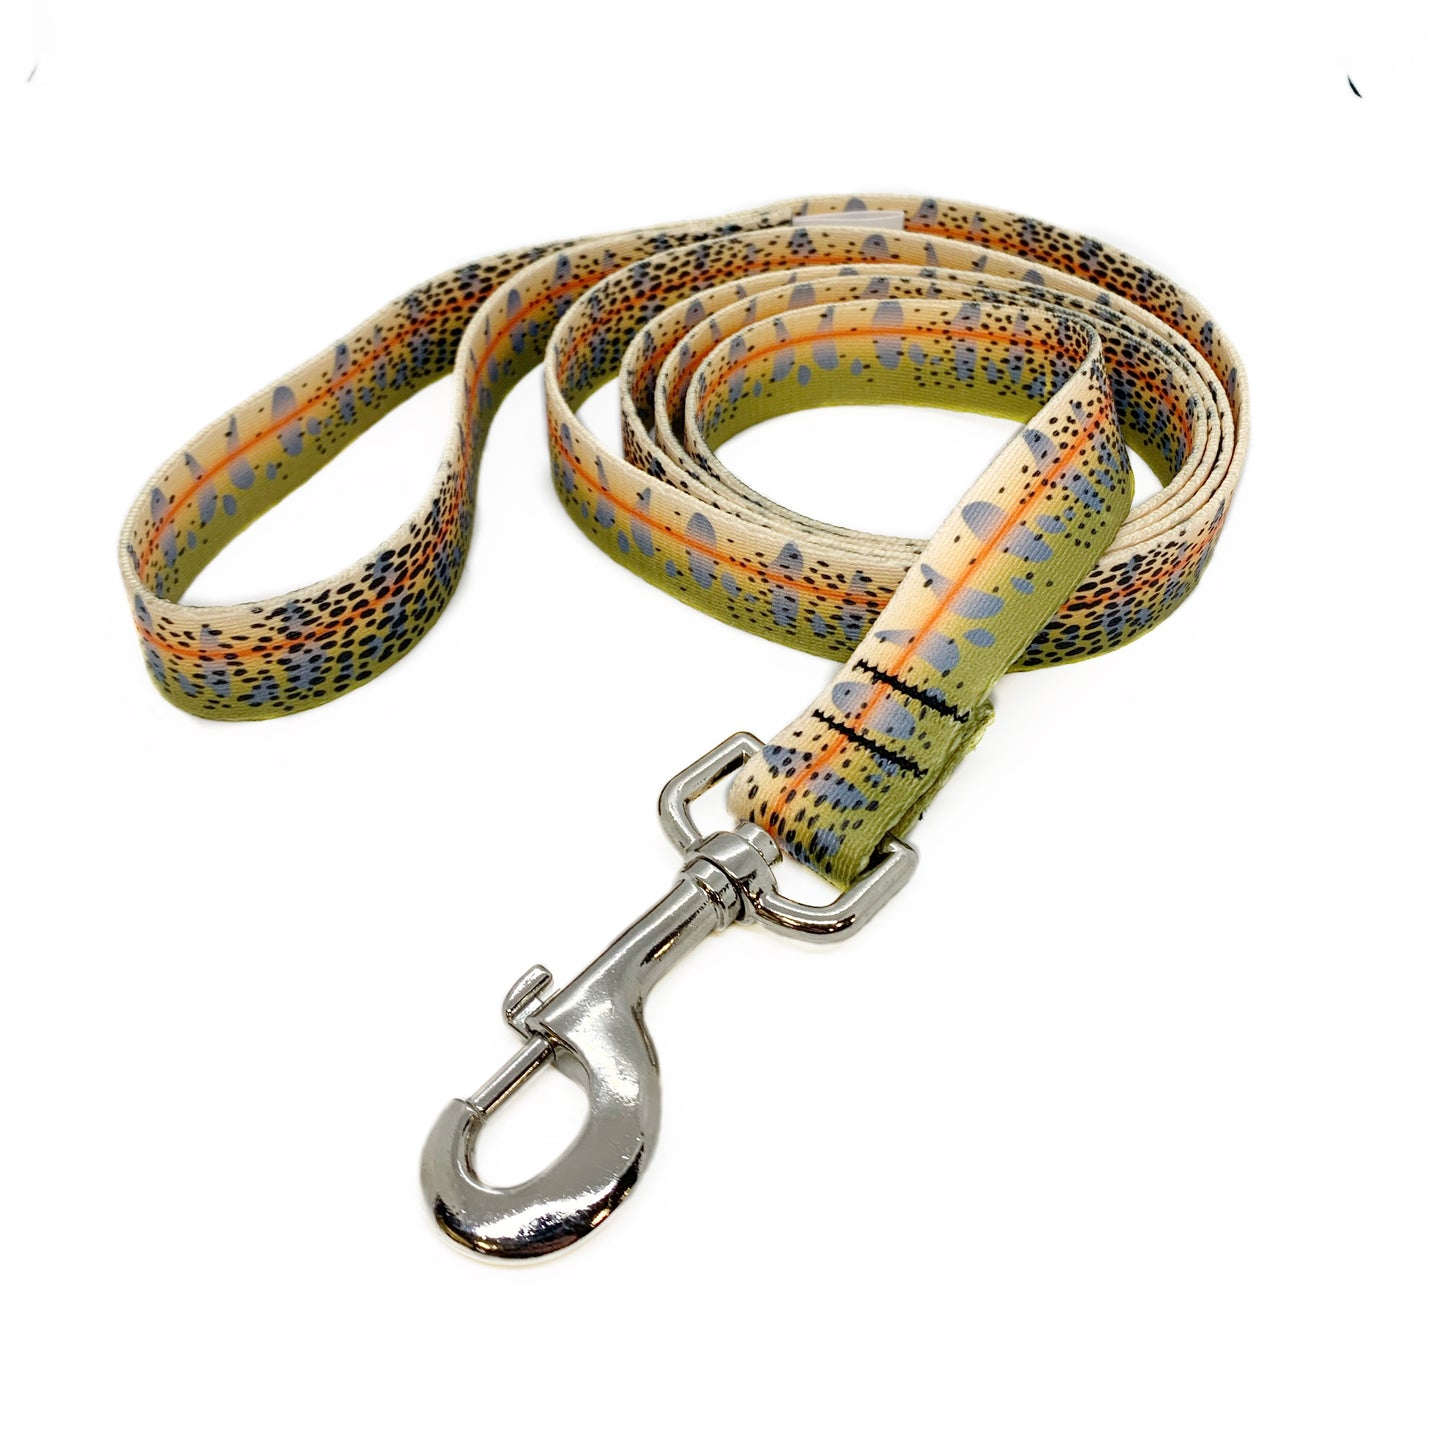 A dog leash with a black clip has the pattern of a cutthroat trout on it